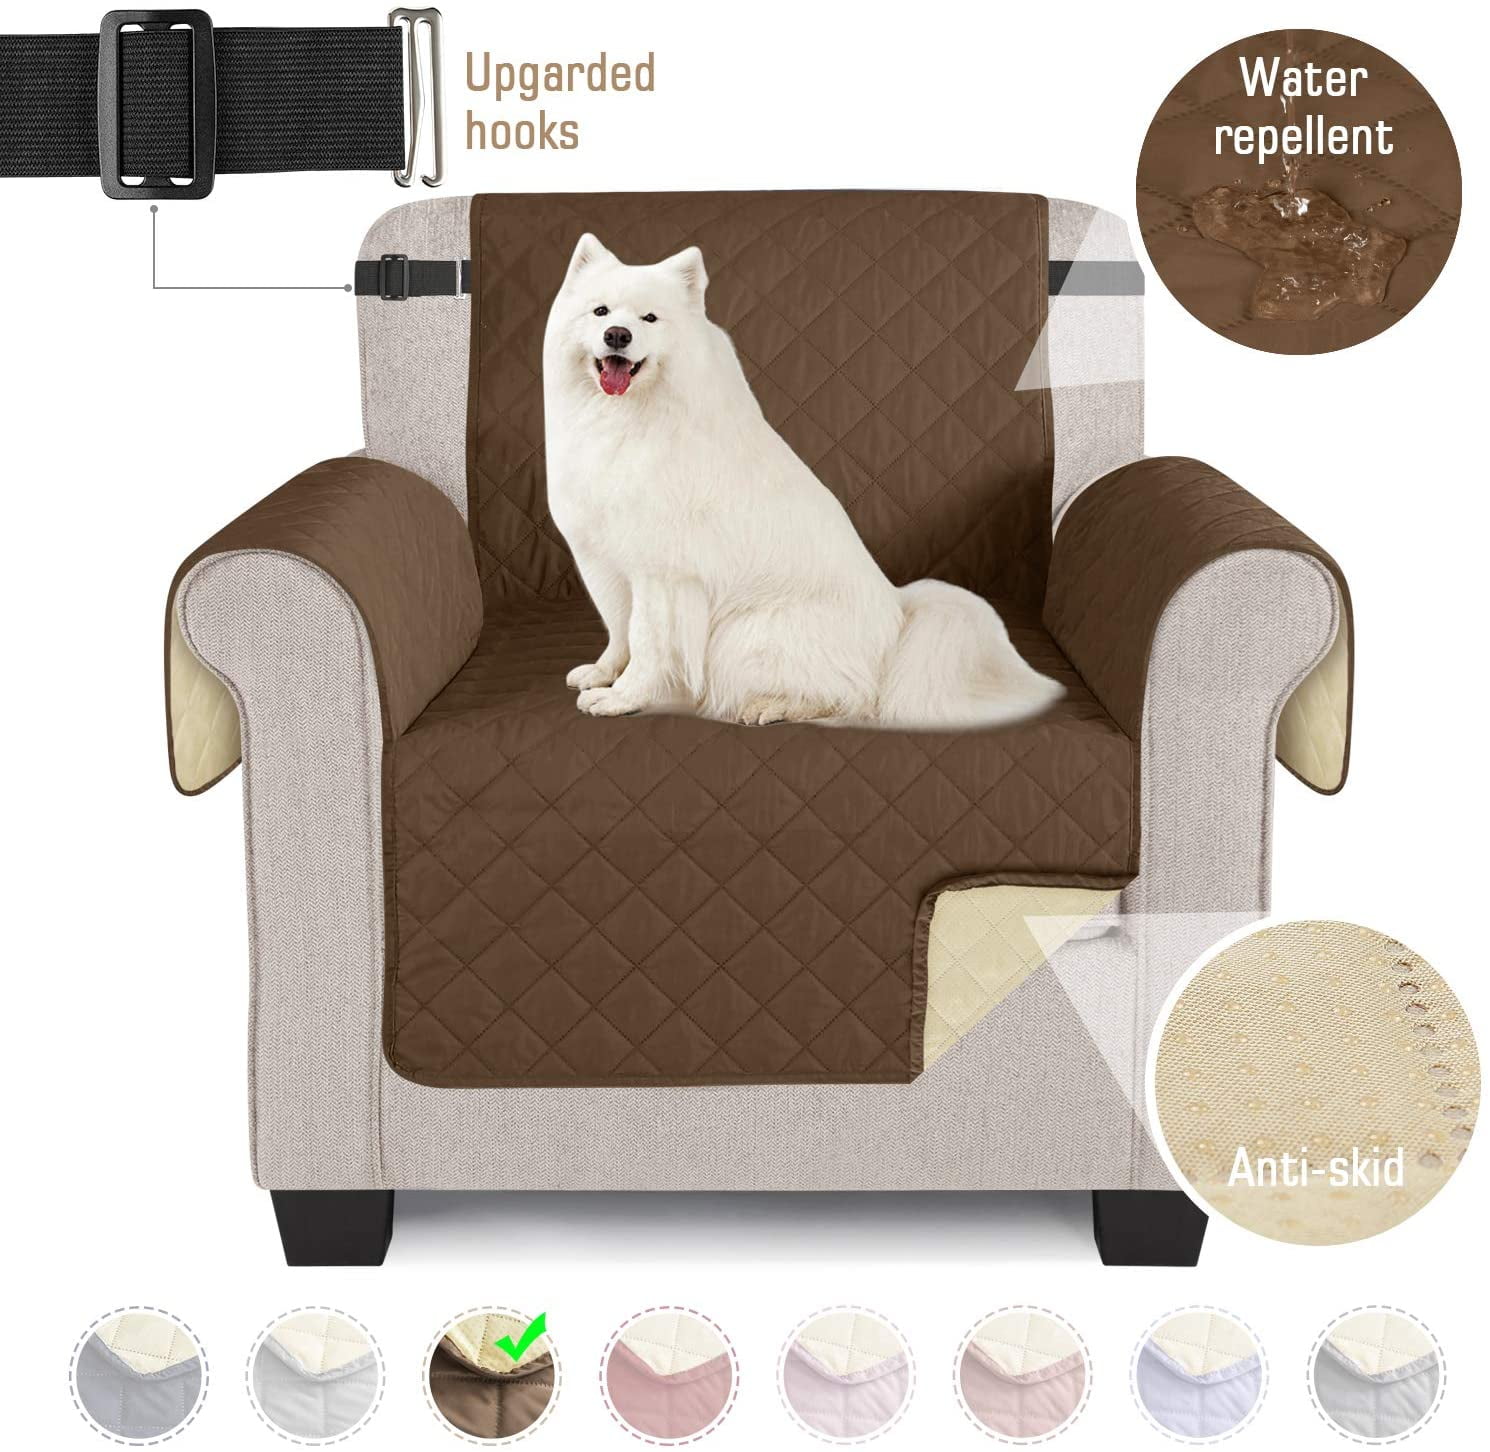 Sofa Cover 1 Seater Slipcovers Anti Slip Sofa Protector Cover Water Resistant Furniture Protector,Furniture Slipcover,Reversible Furniture Protector for Dogs Pets and Dirt Proof 165 x 190 cm, Brown 